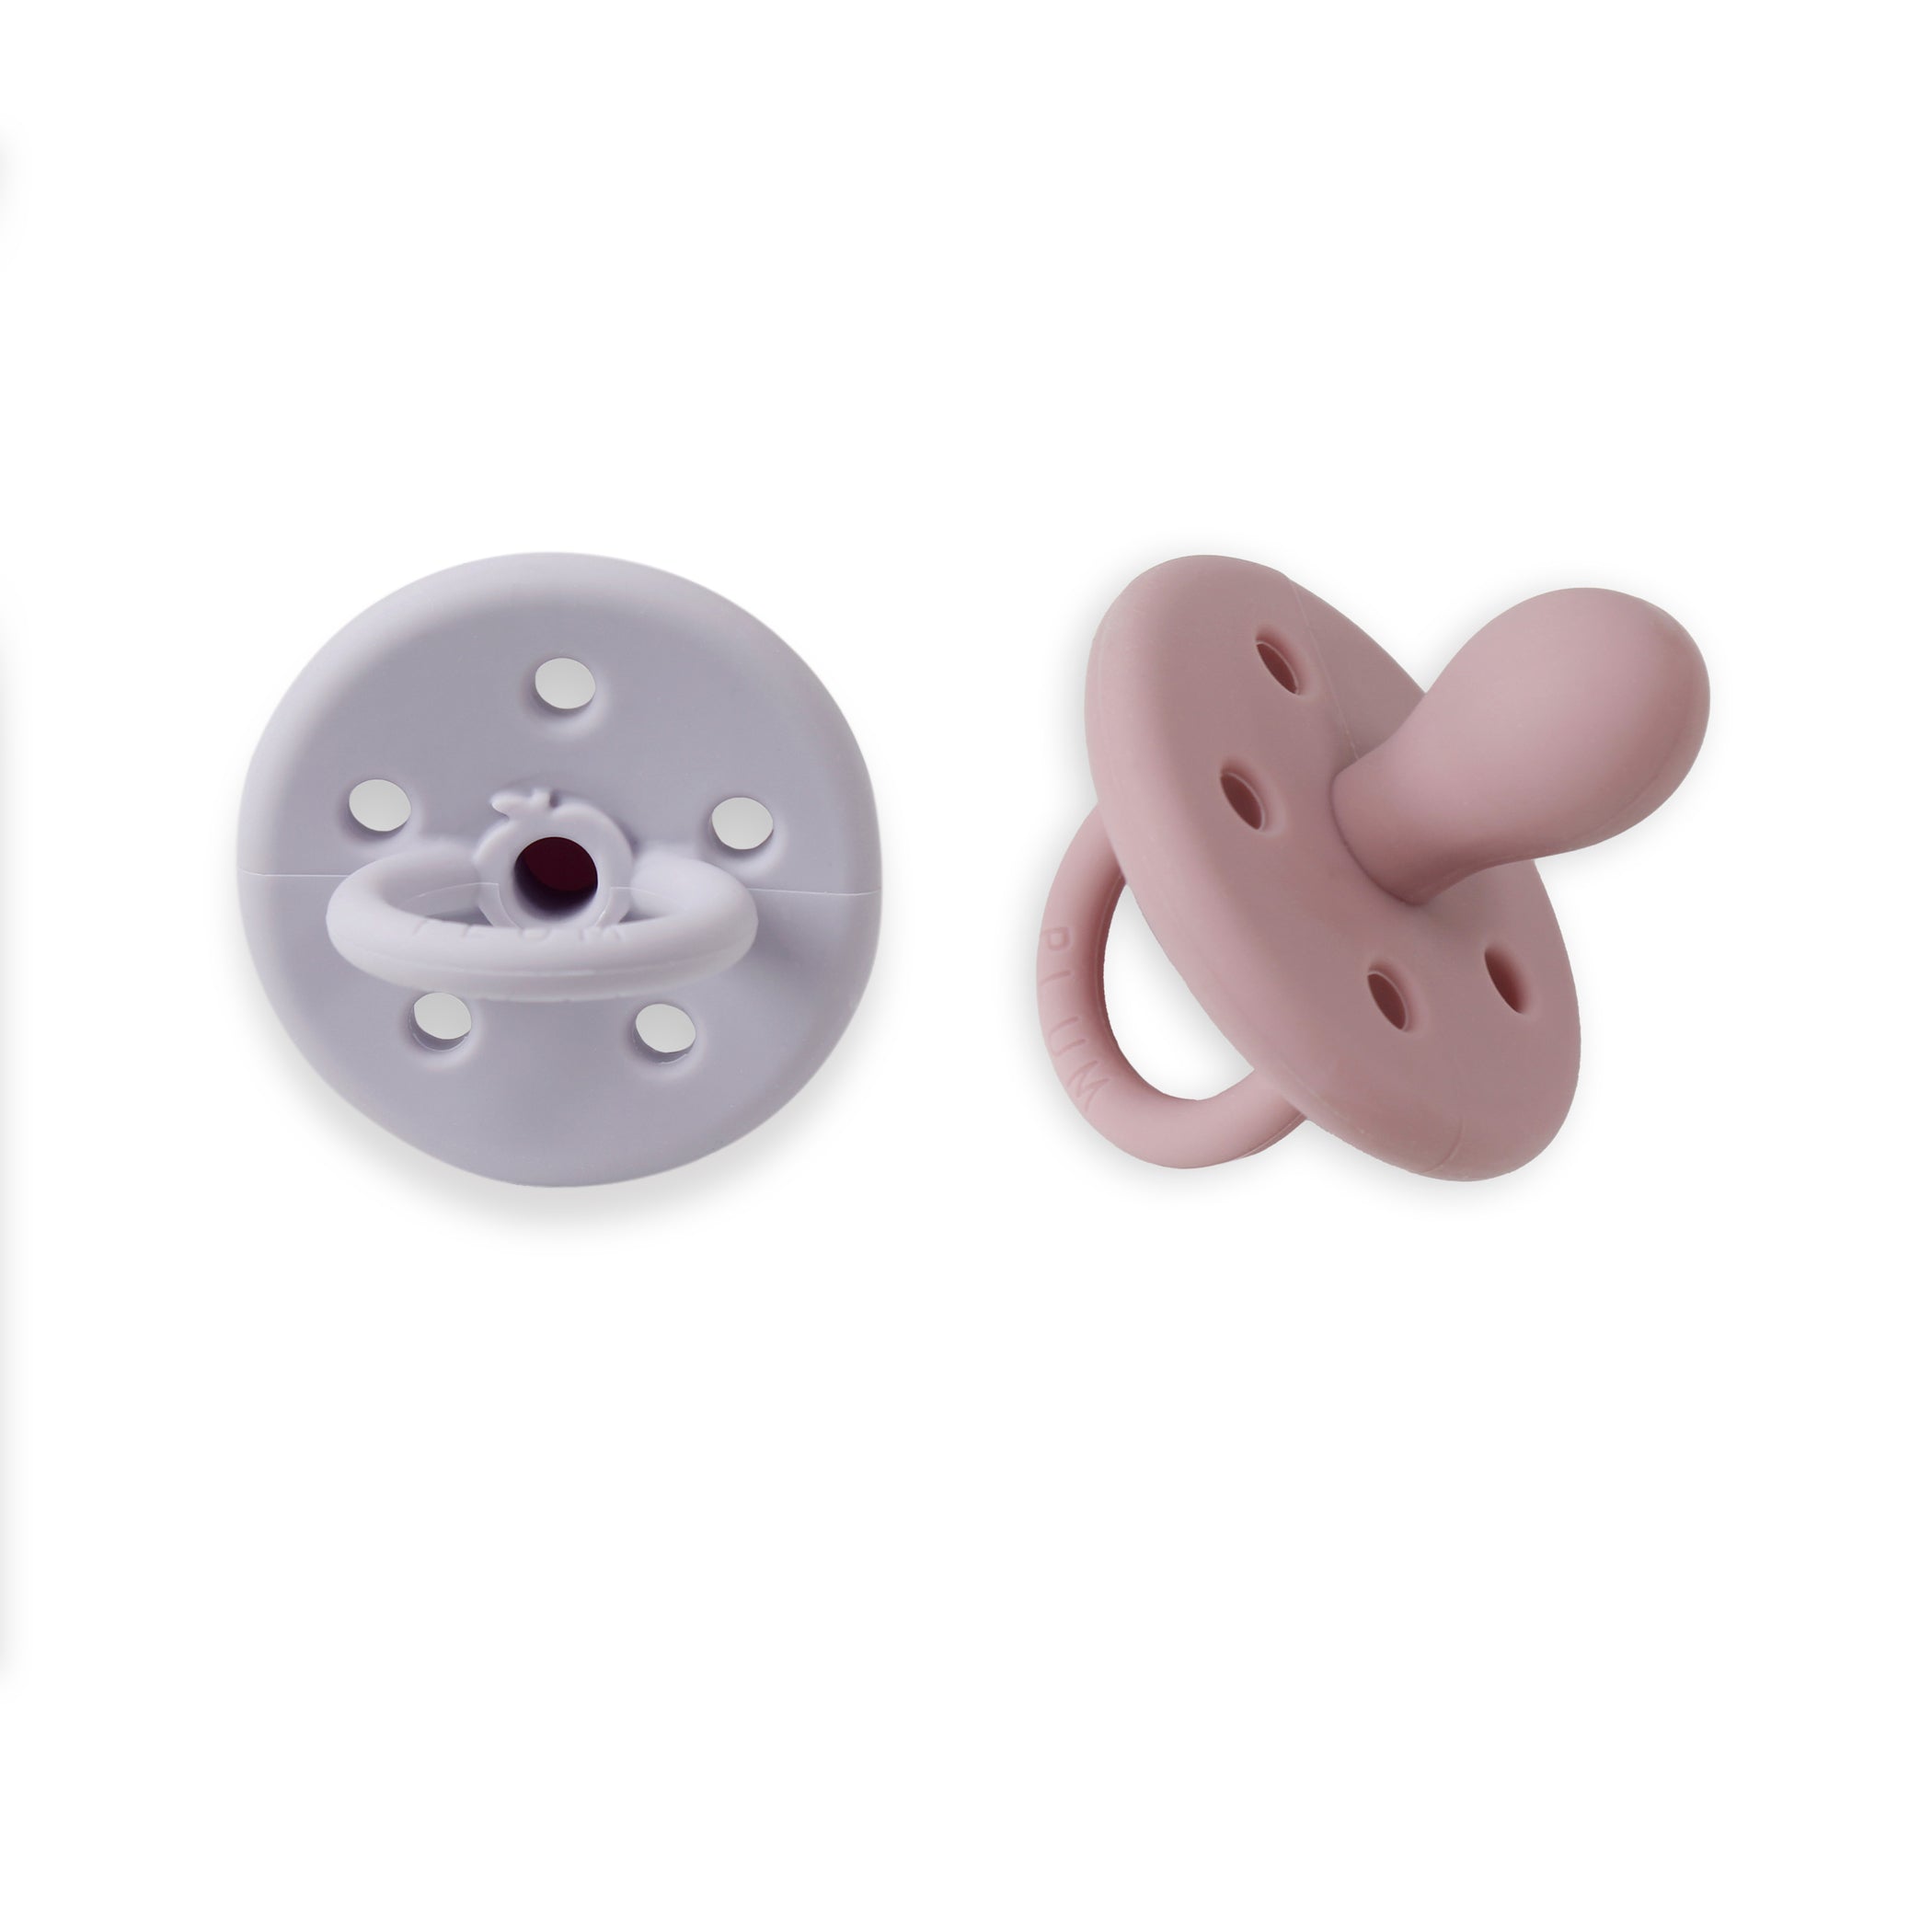 2PK Silicone Soothers - Dusty Berry & Smokey Lilac (0-6M)